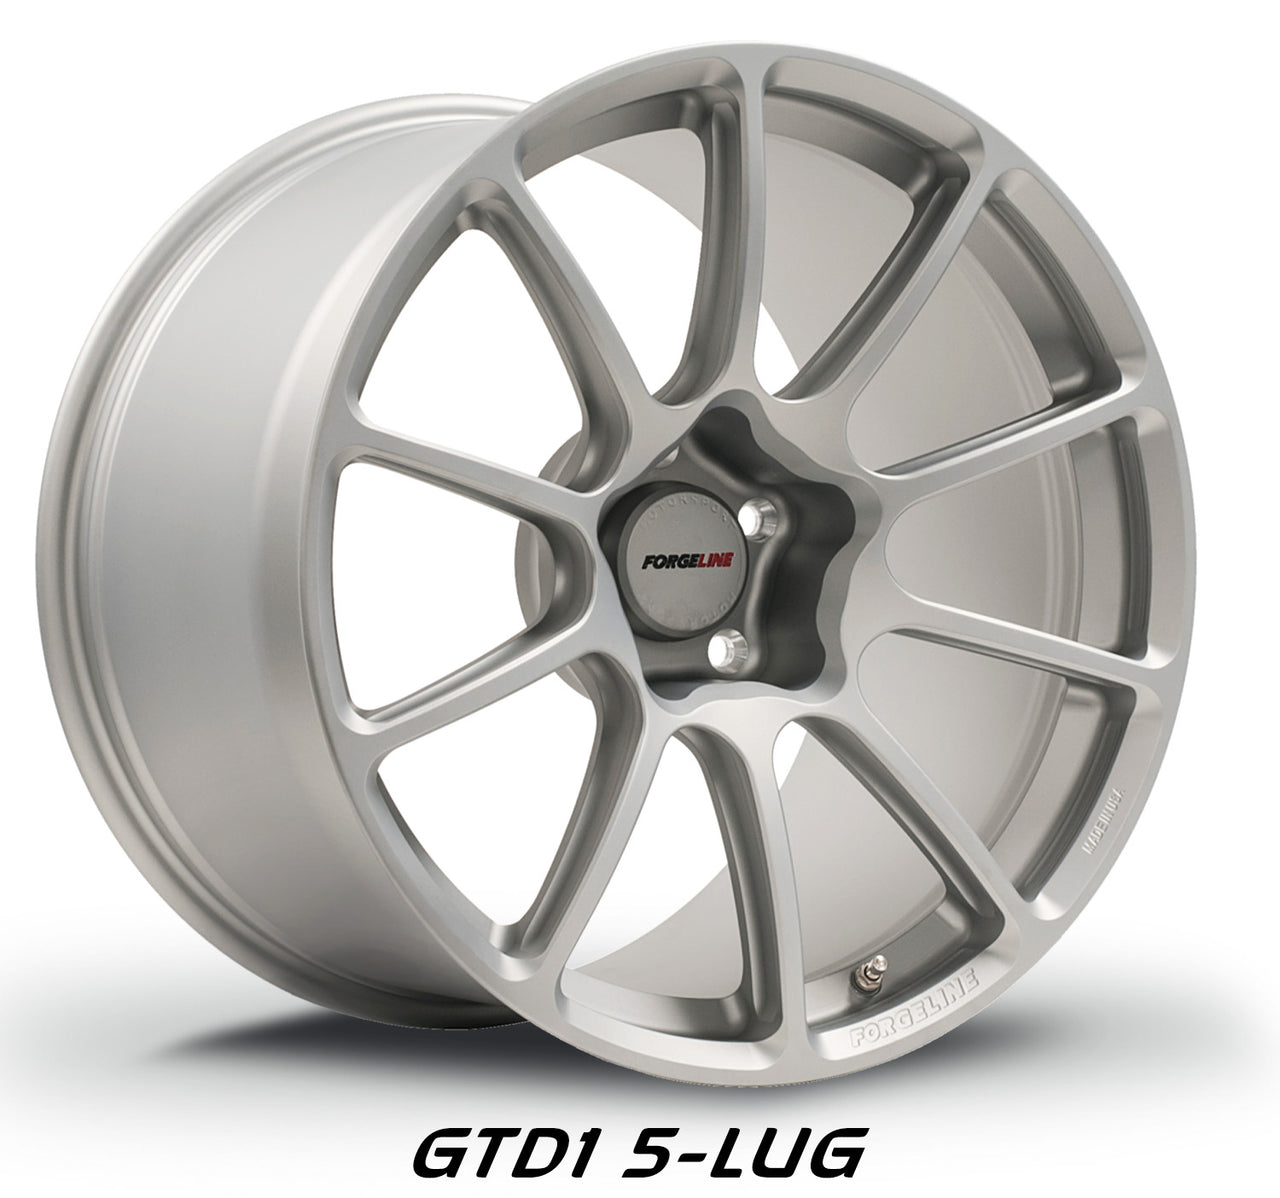 GTD1 5-Lug Racing Wheel from Forgeline Wheels is an excellent choice for the C8 Corvette